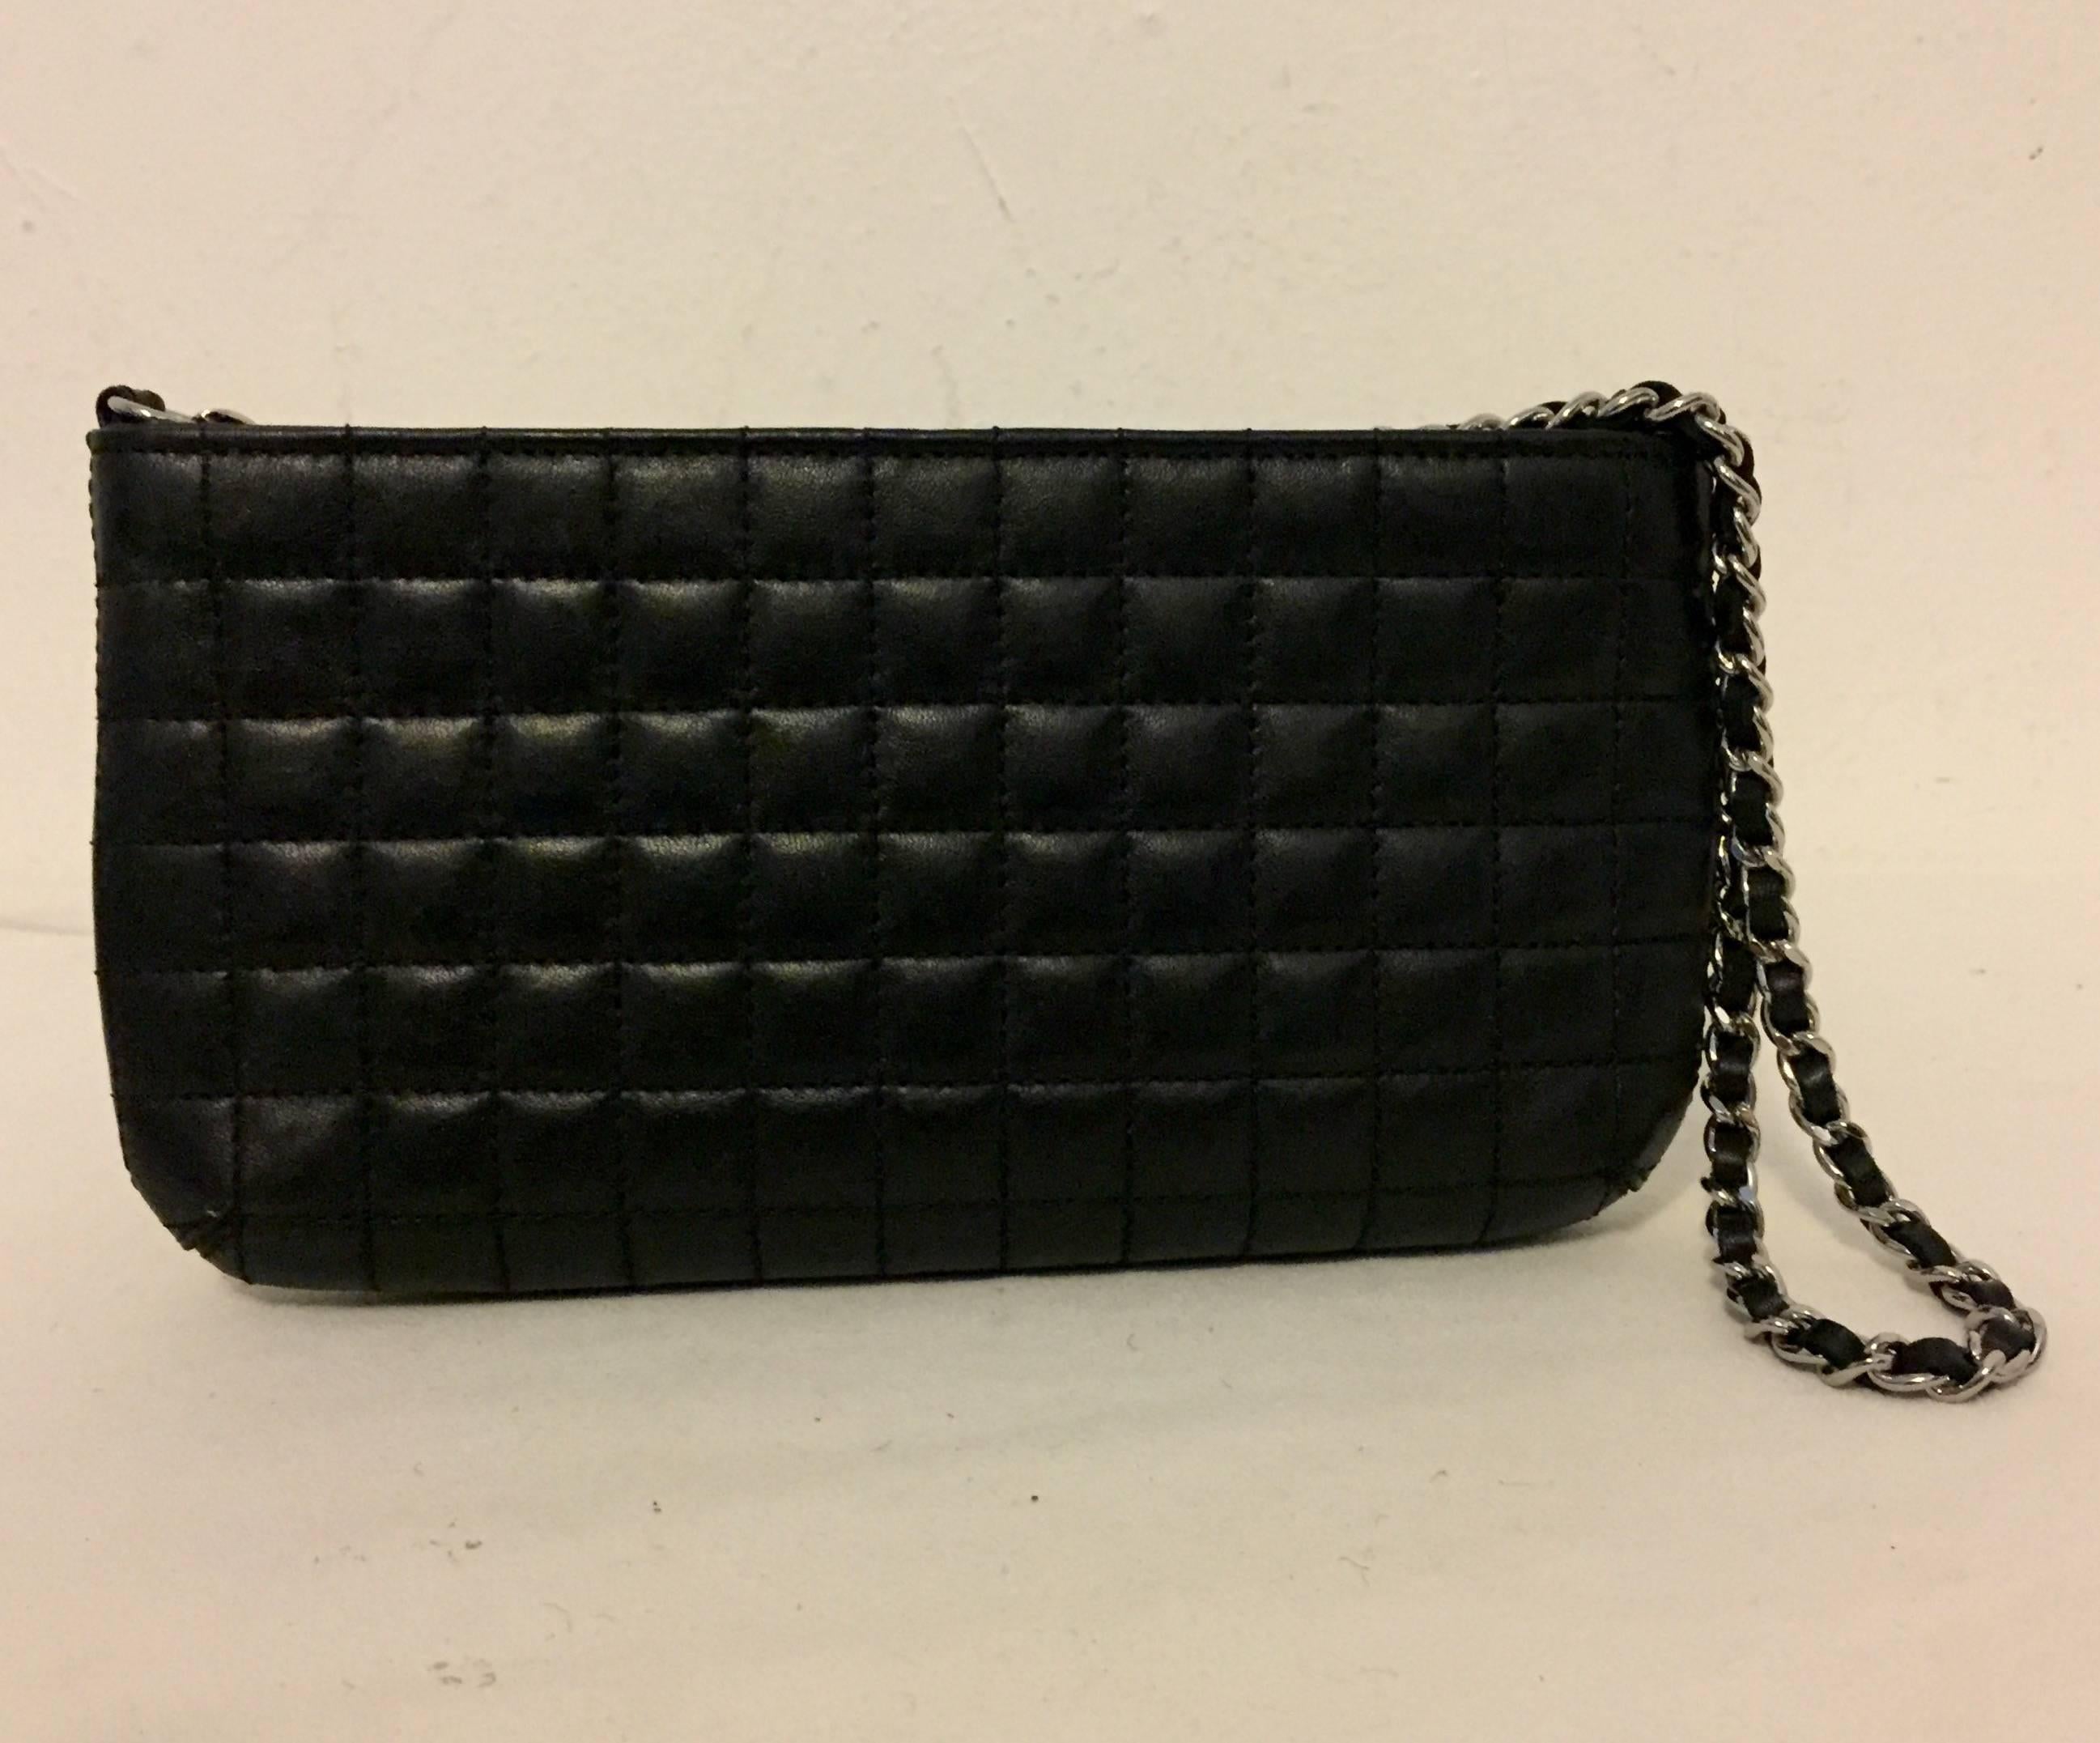 This Oh So Chic Chanel wristlet is crafted of luxurious square quilted black lambskin leather with elaborate embellishment of the entwined CC, the No. 5 and the classic Camellia flower.  The bag features a silver leather threaded wrist strap. The